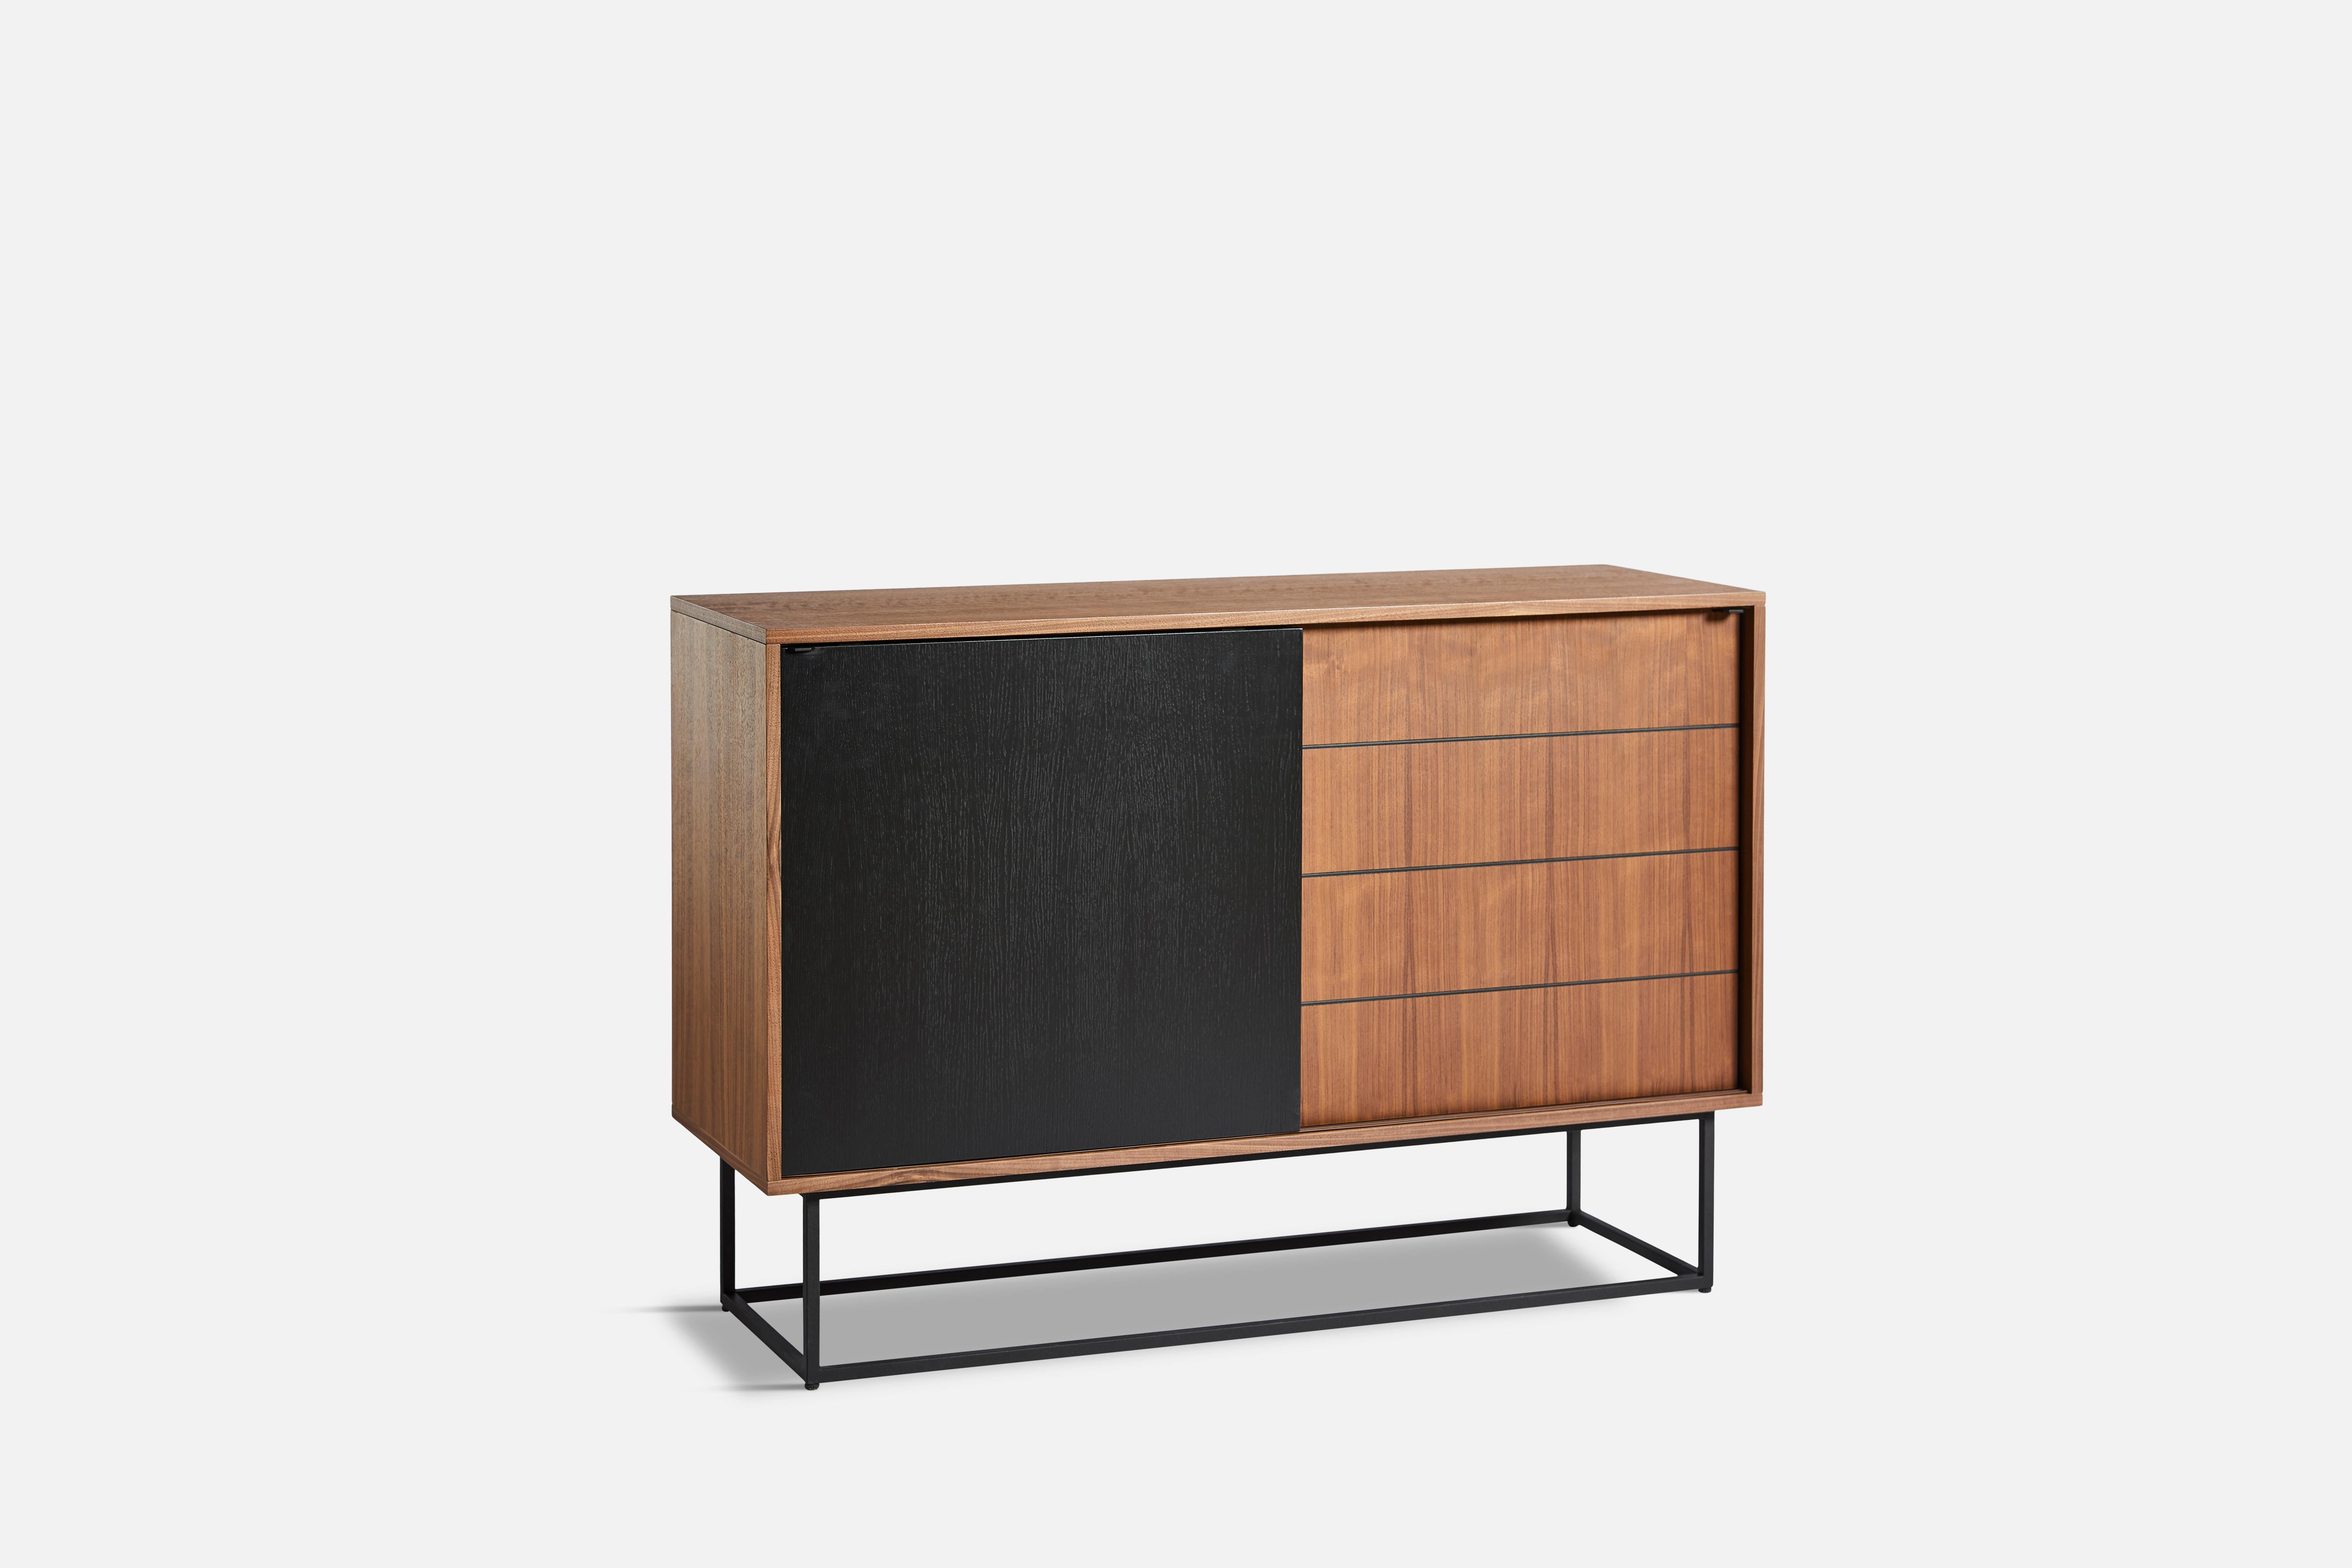 Virka high sideboard by Ropke Design and Moaak
Materials: walnut, metal.
Dimensions: D 40 x W 120 x H 82 cm
Also available in different colours and materials.

The founders, Mia and Torben Koed, decided to put their 30 years of experience into